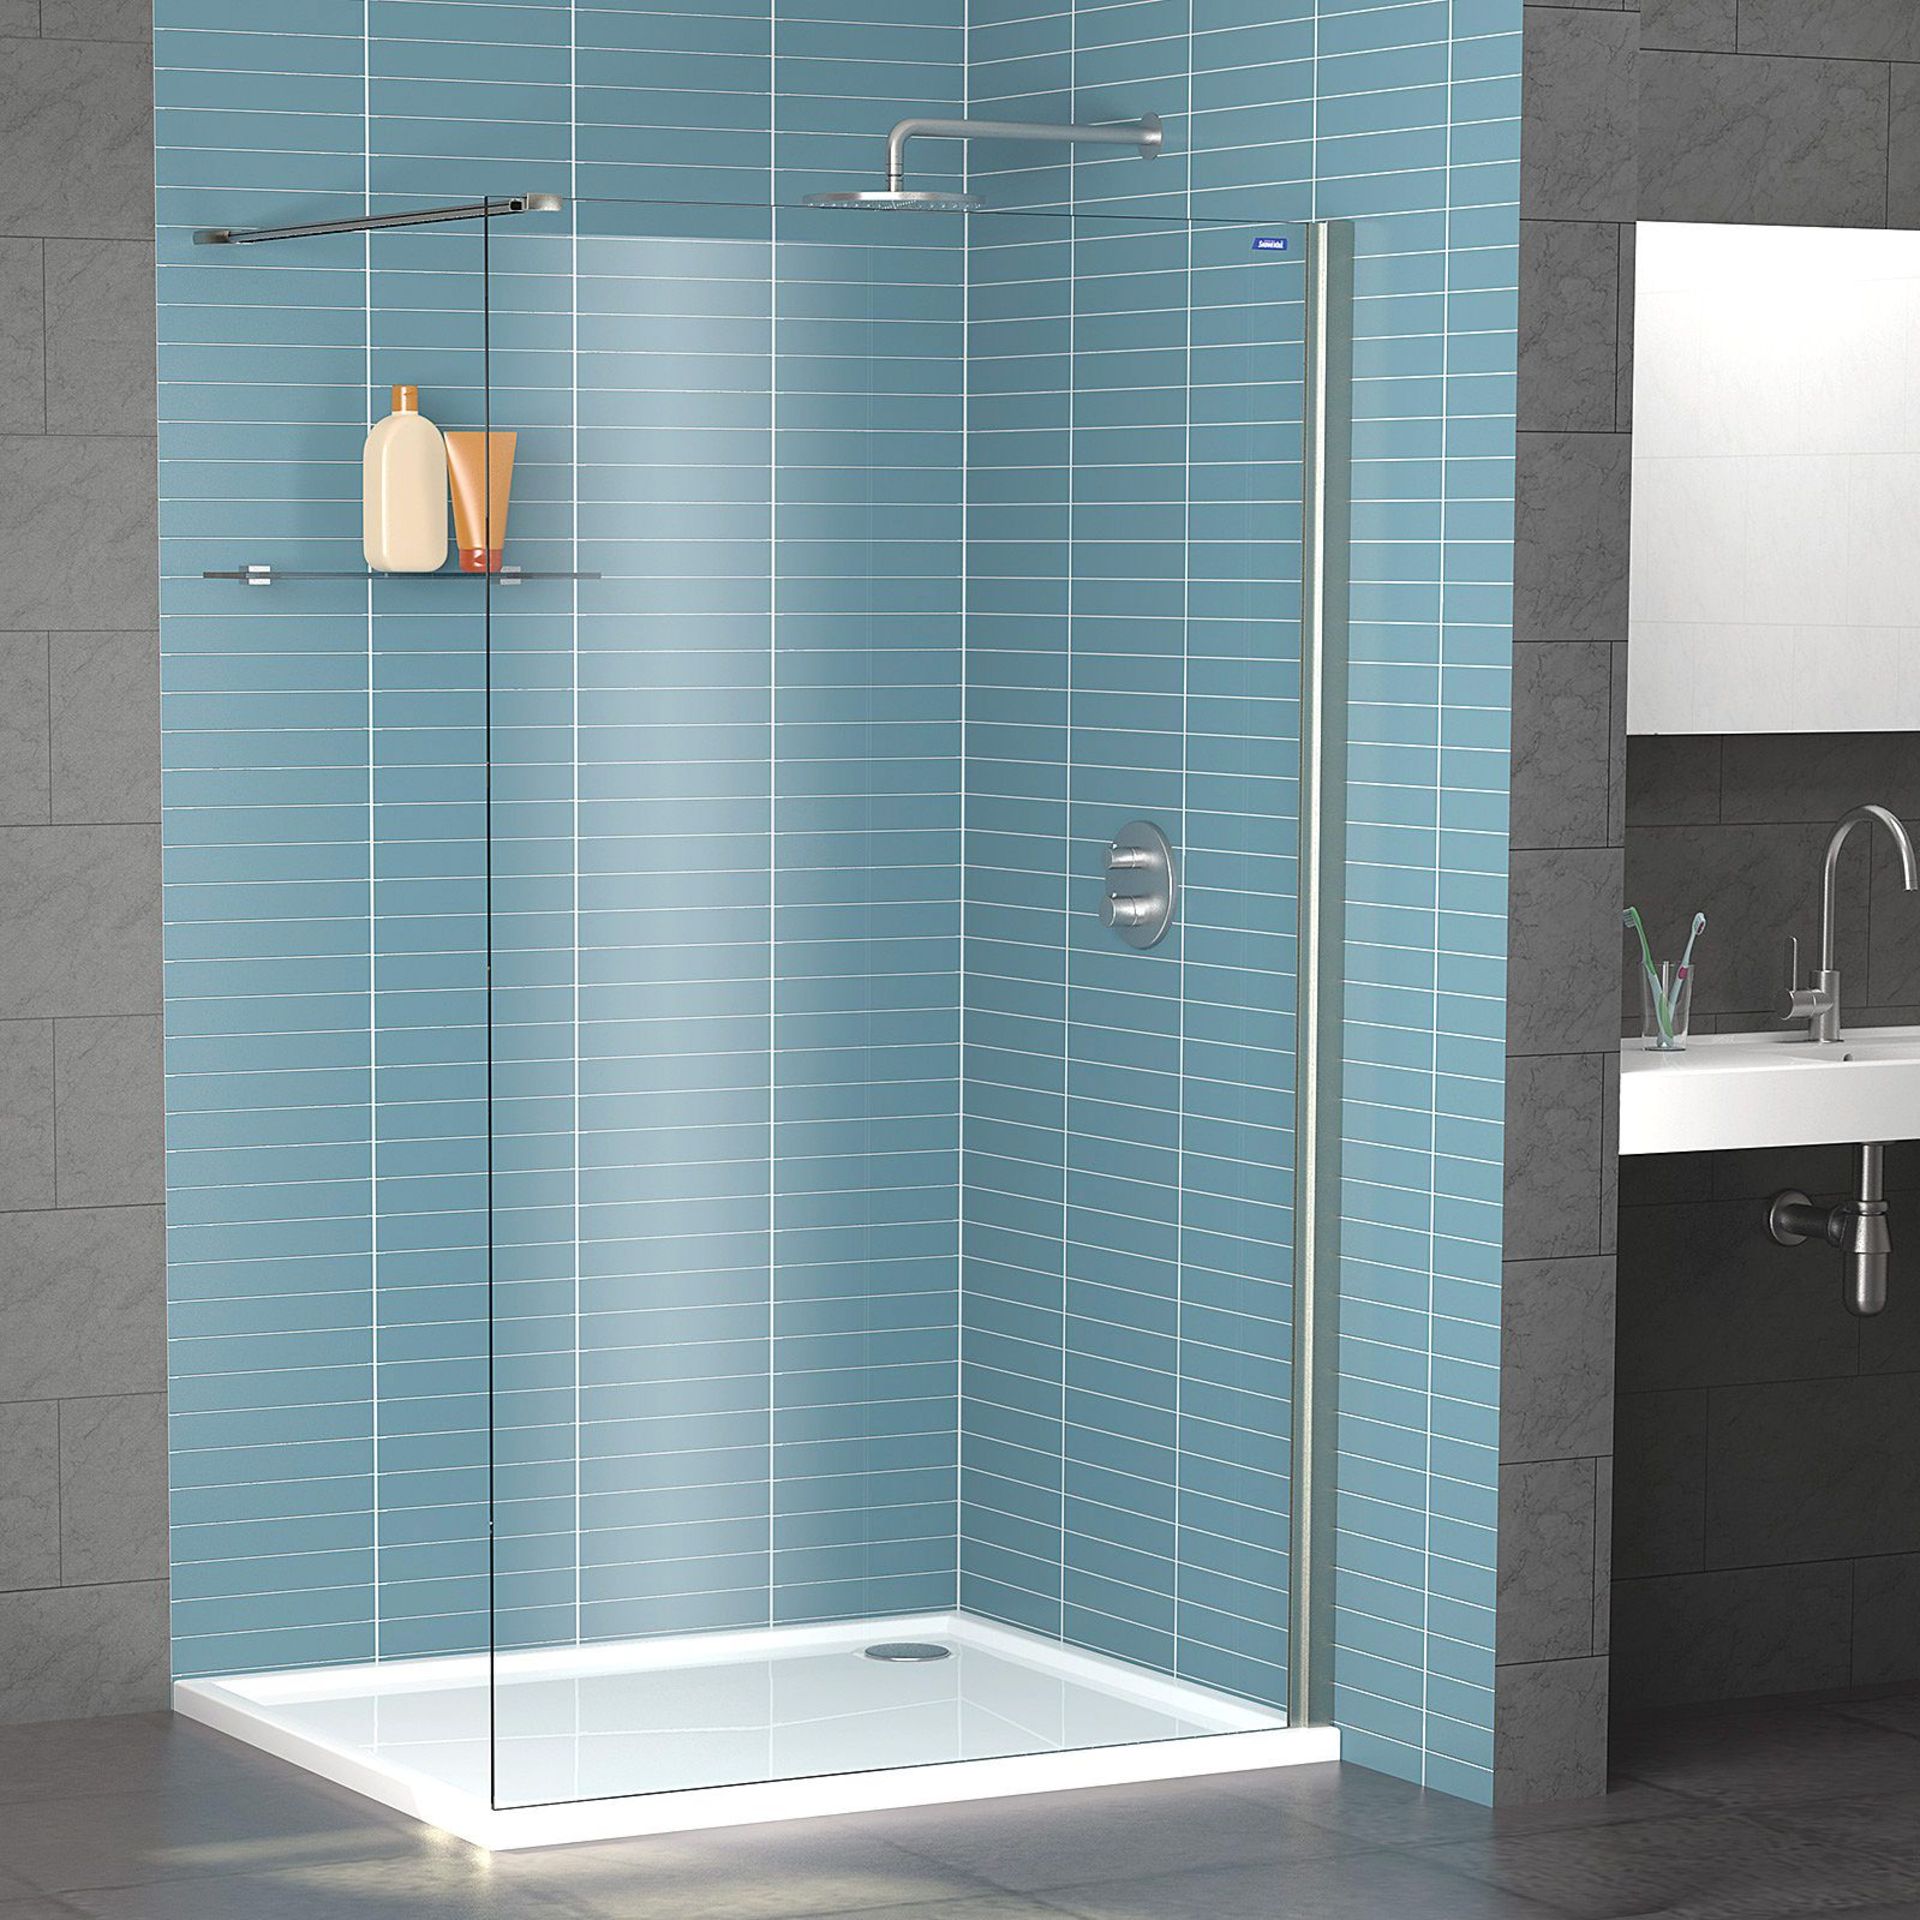 Shower Lux legacy wet room panel, 1900mm, new and boxed.